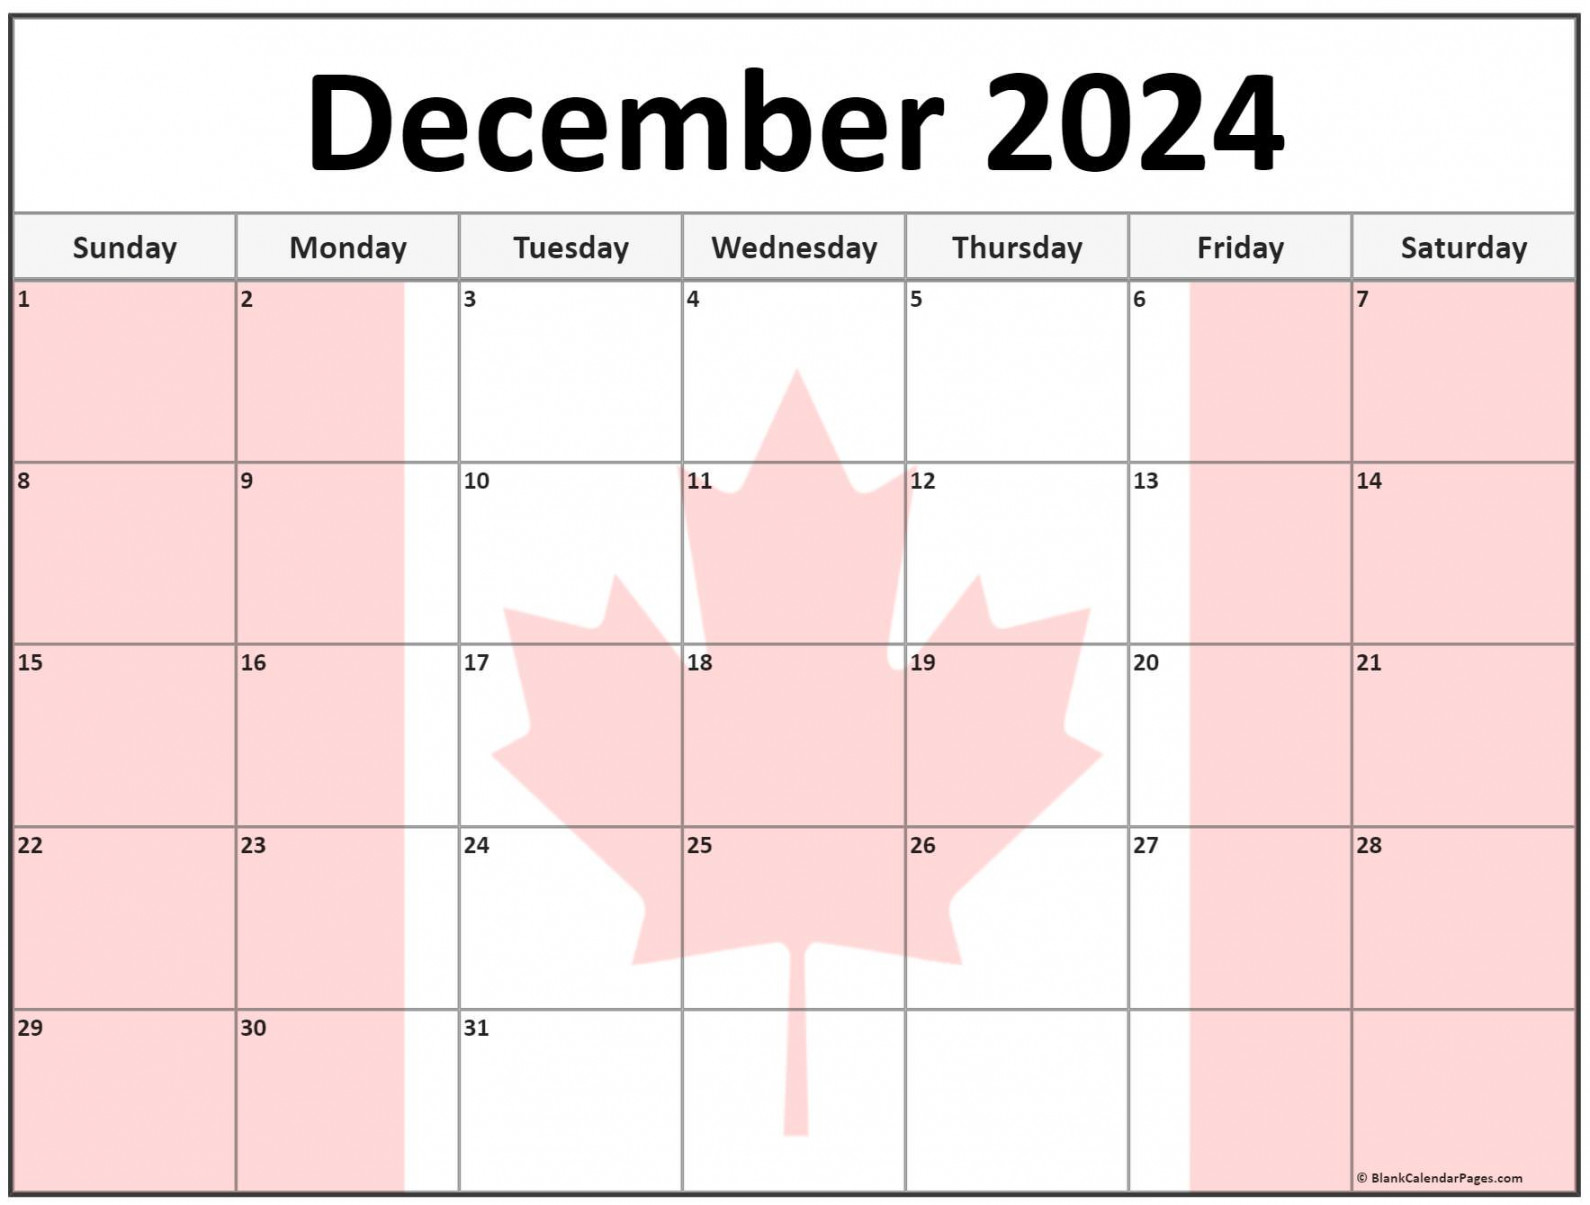 collection of december photo calendars with image filters 0